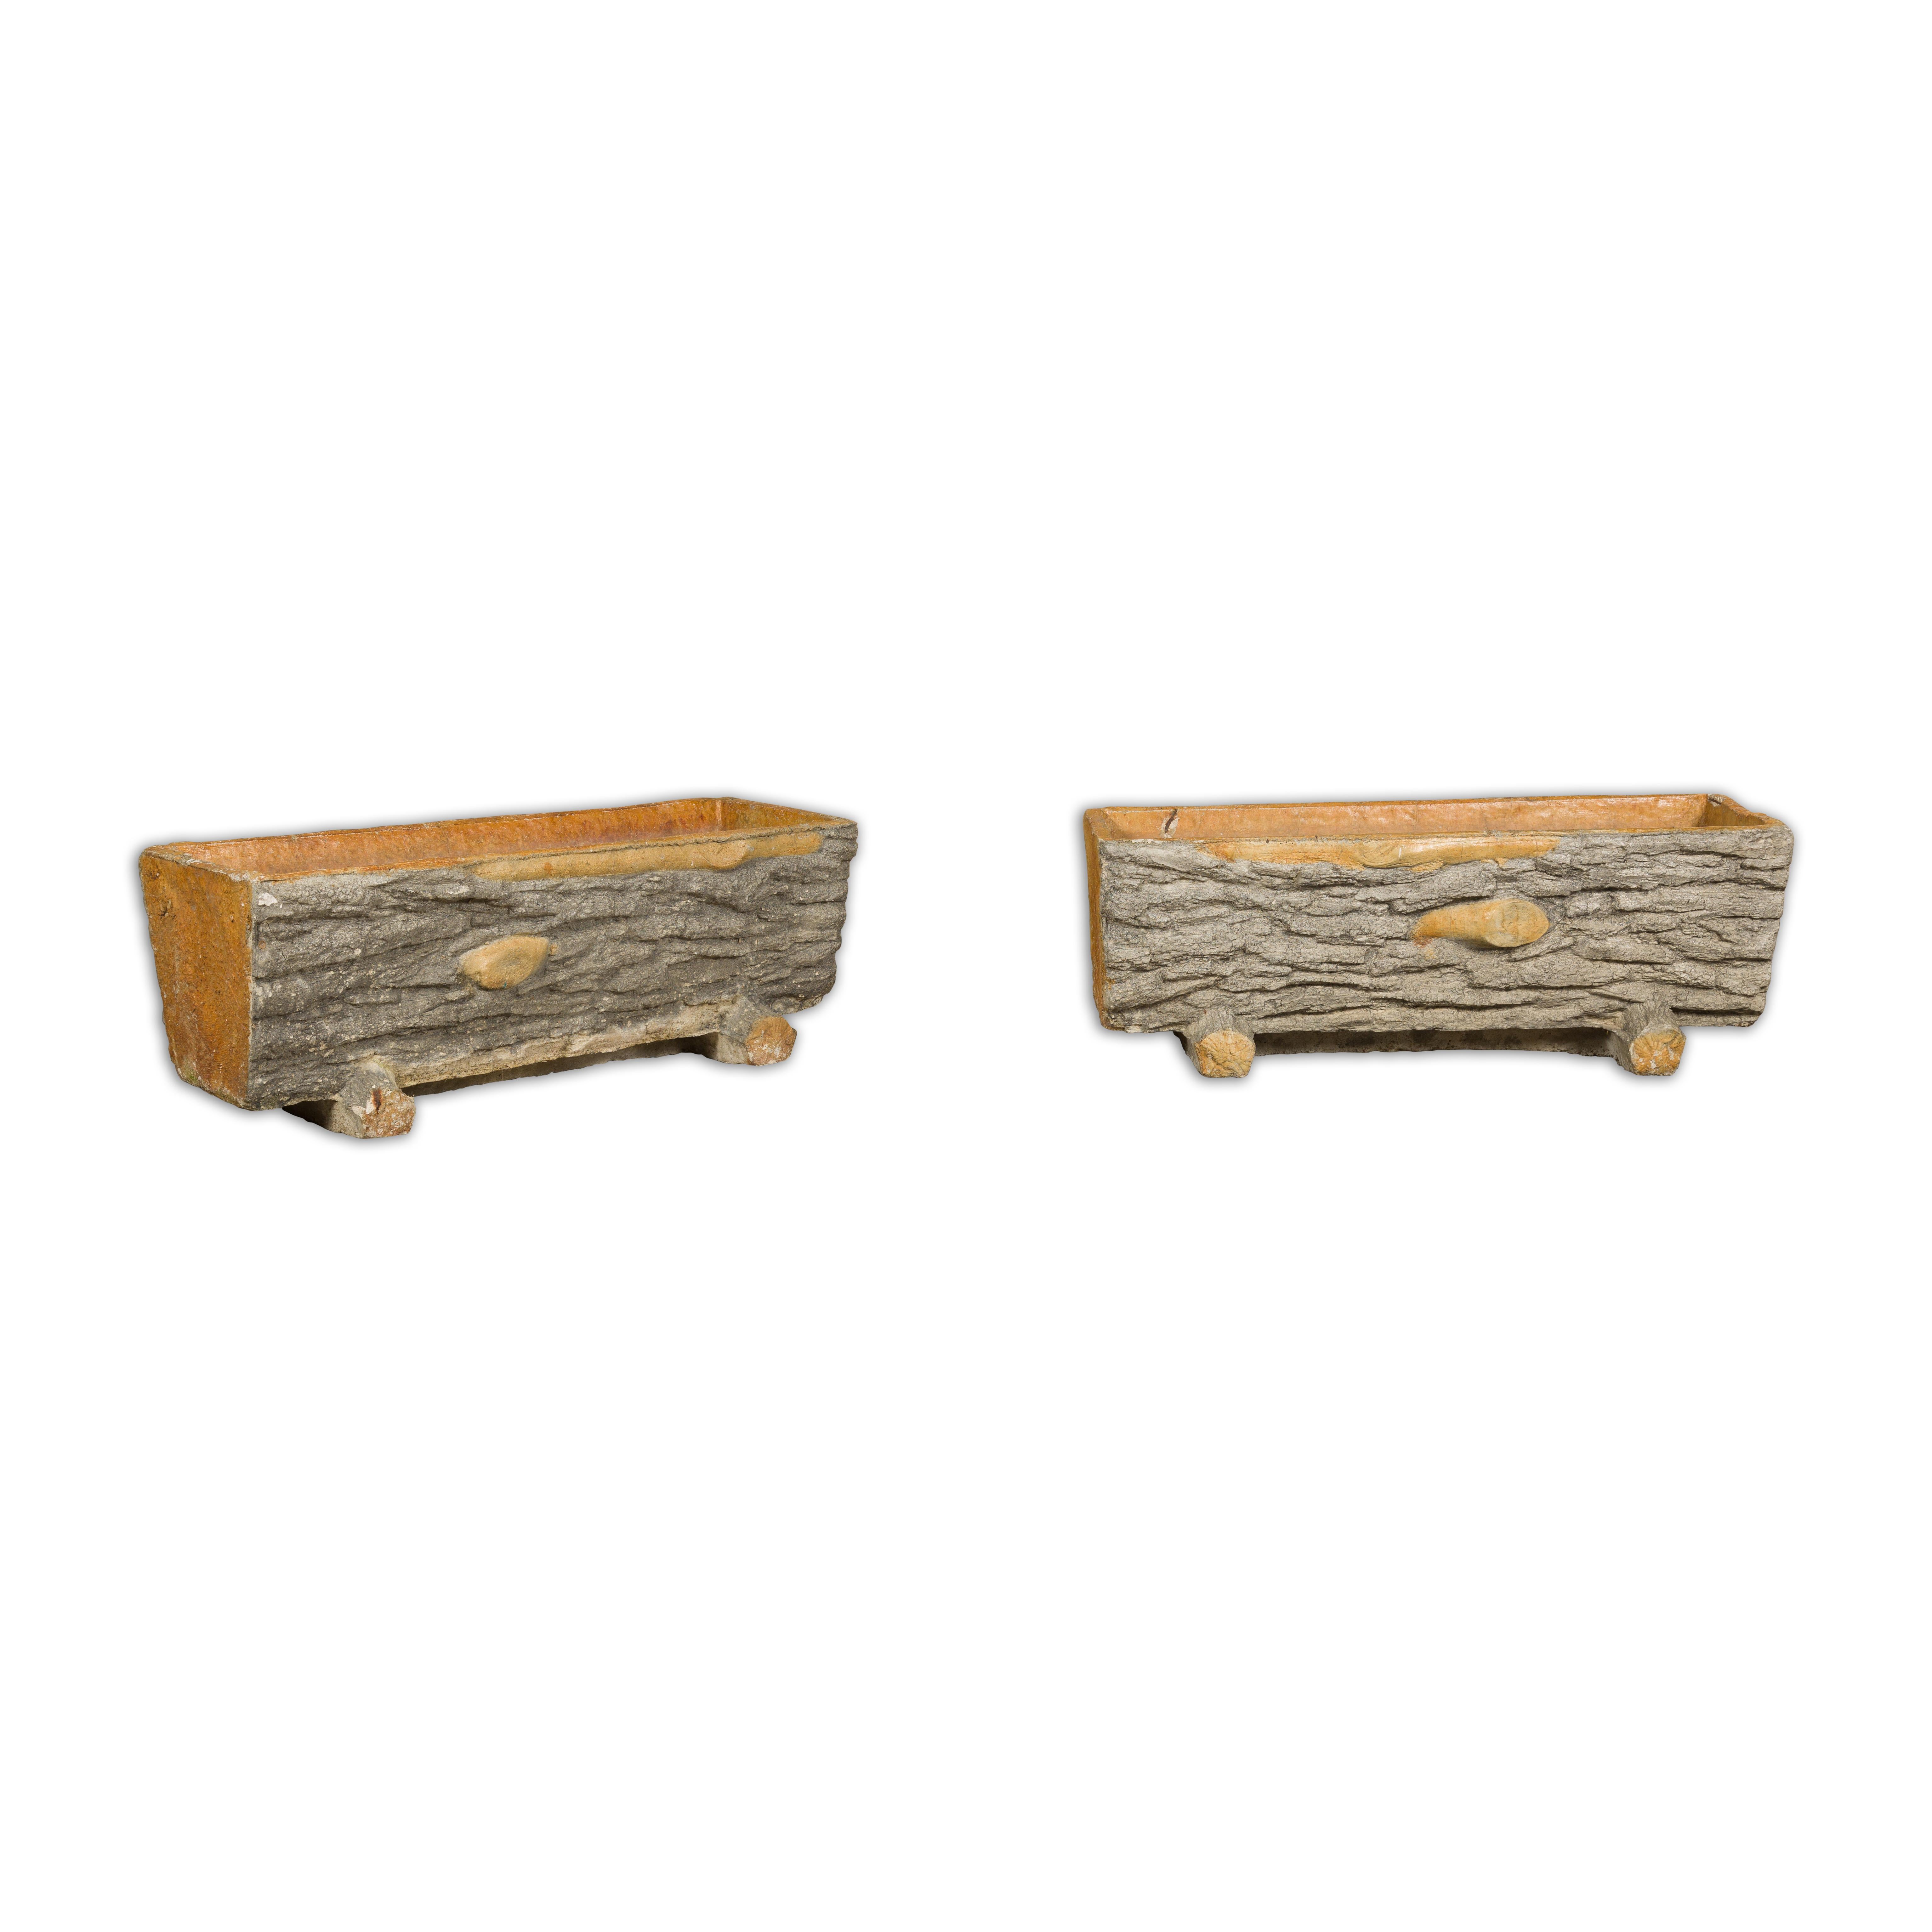 A pair of faux-bois trough shaped planters circa 1930, made of concrete with grey and orange tones. Enhance your outdoor space with this captivating pair of faux-bois trough-shaped planters from the 1930s. These planters are crafted from durable